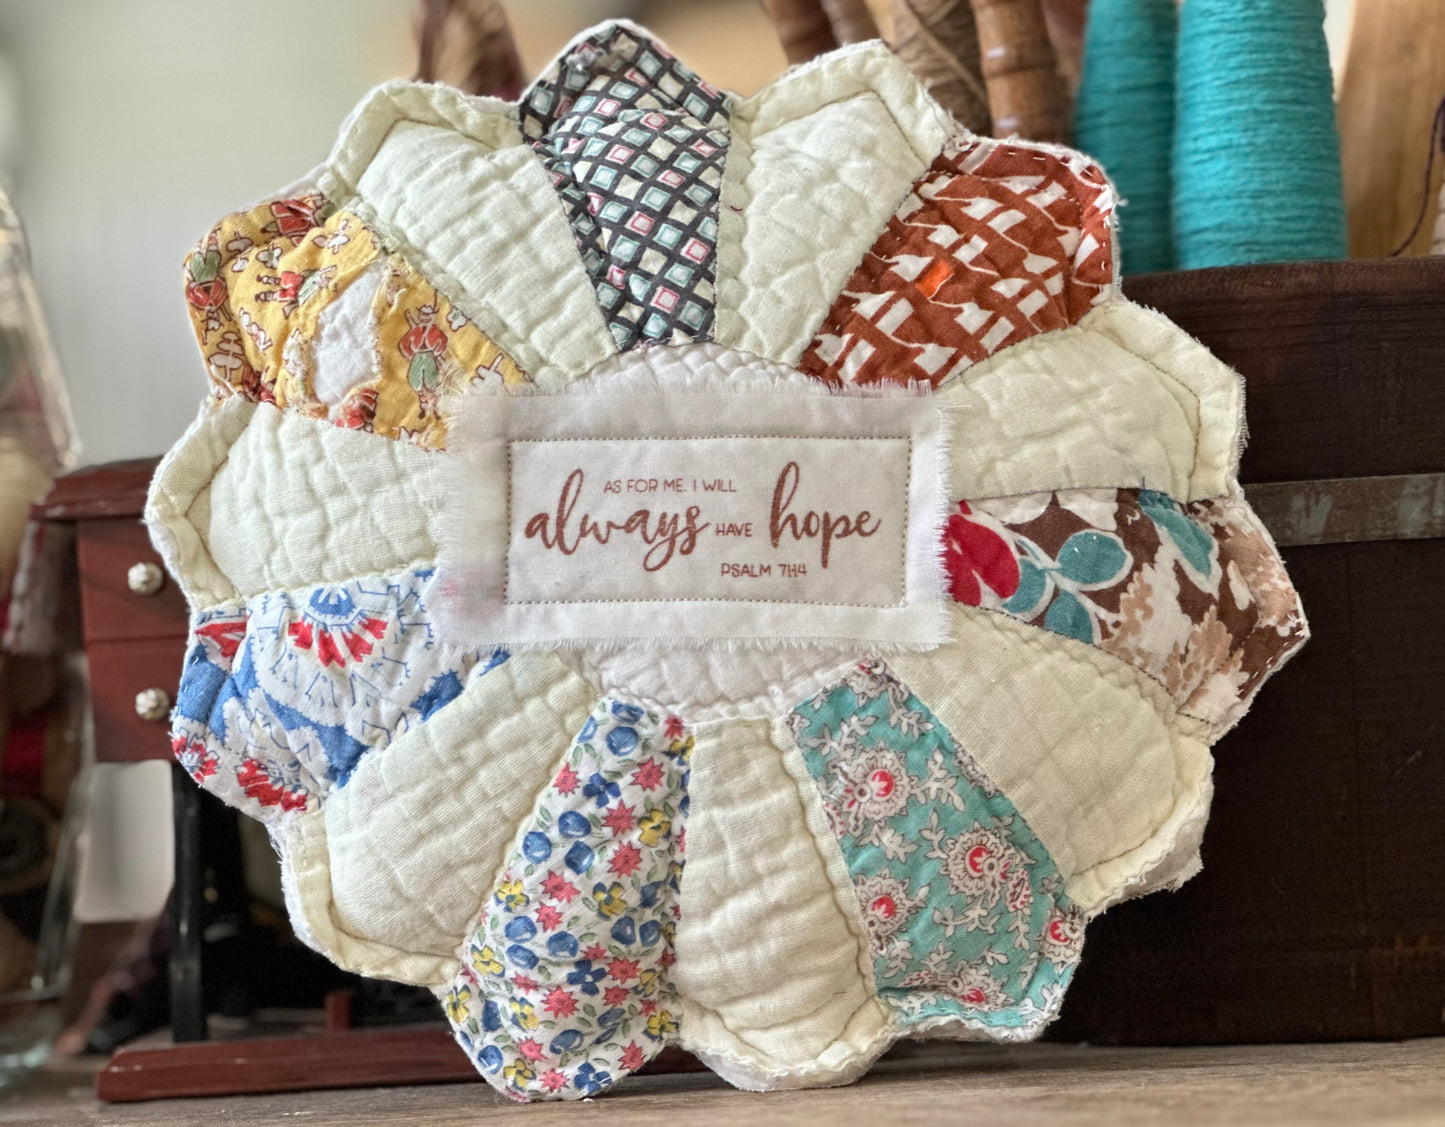 Vintage Quilt Pillow -As for me...I will always have hope